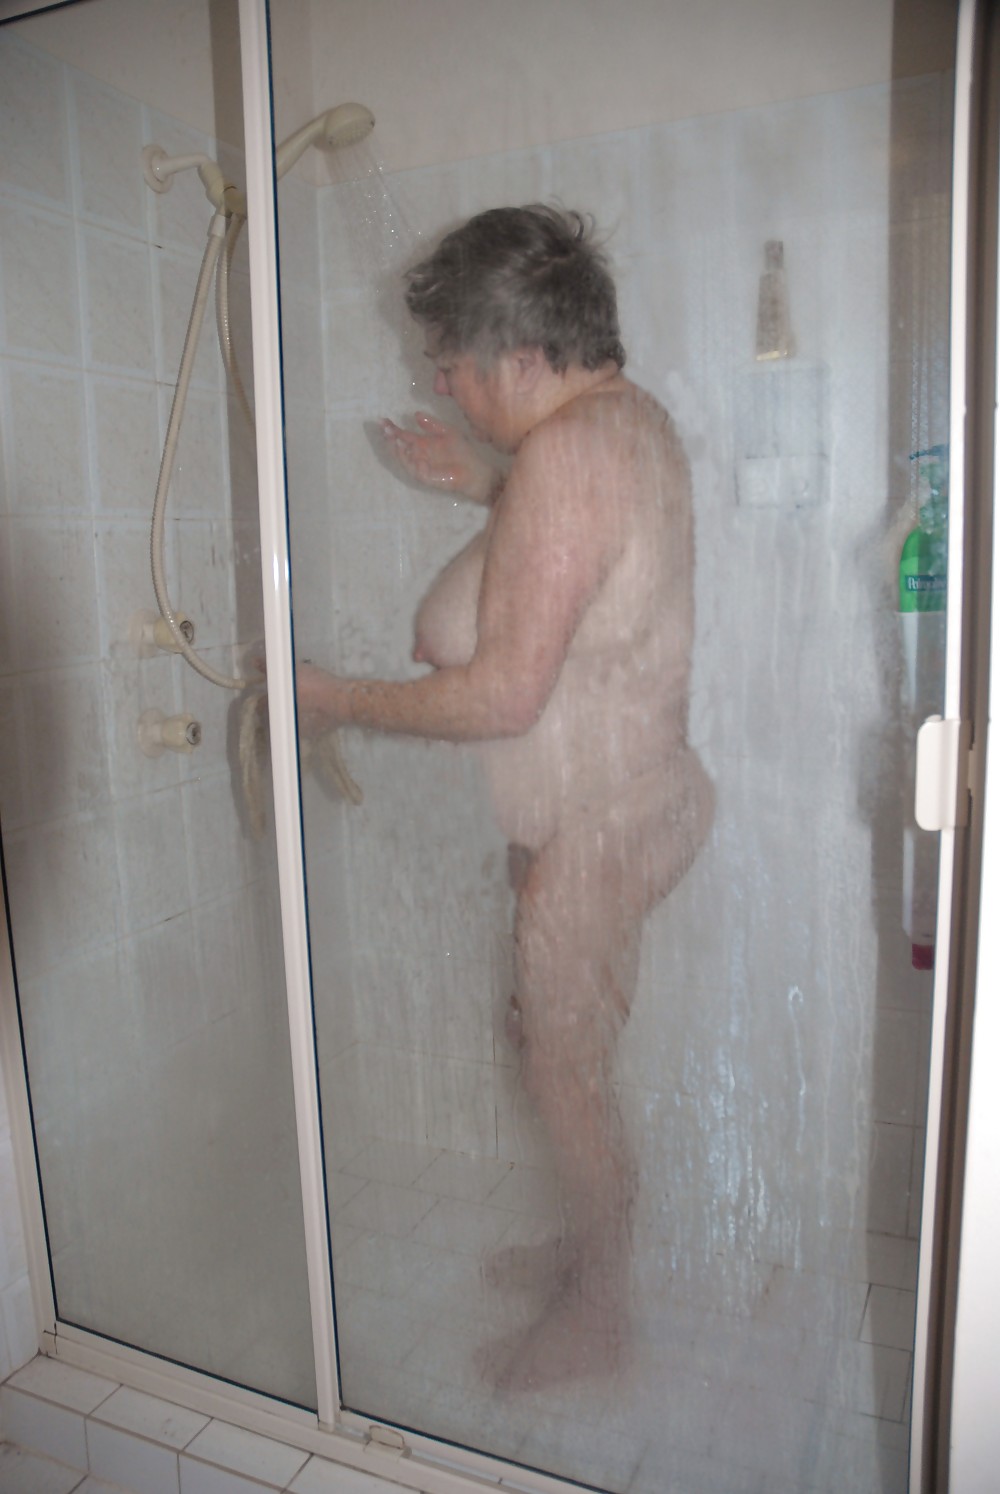 IN THE SHOWER #2209780